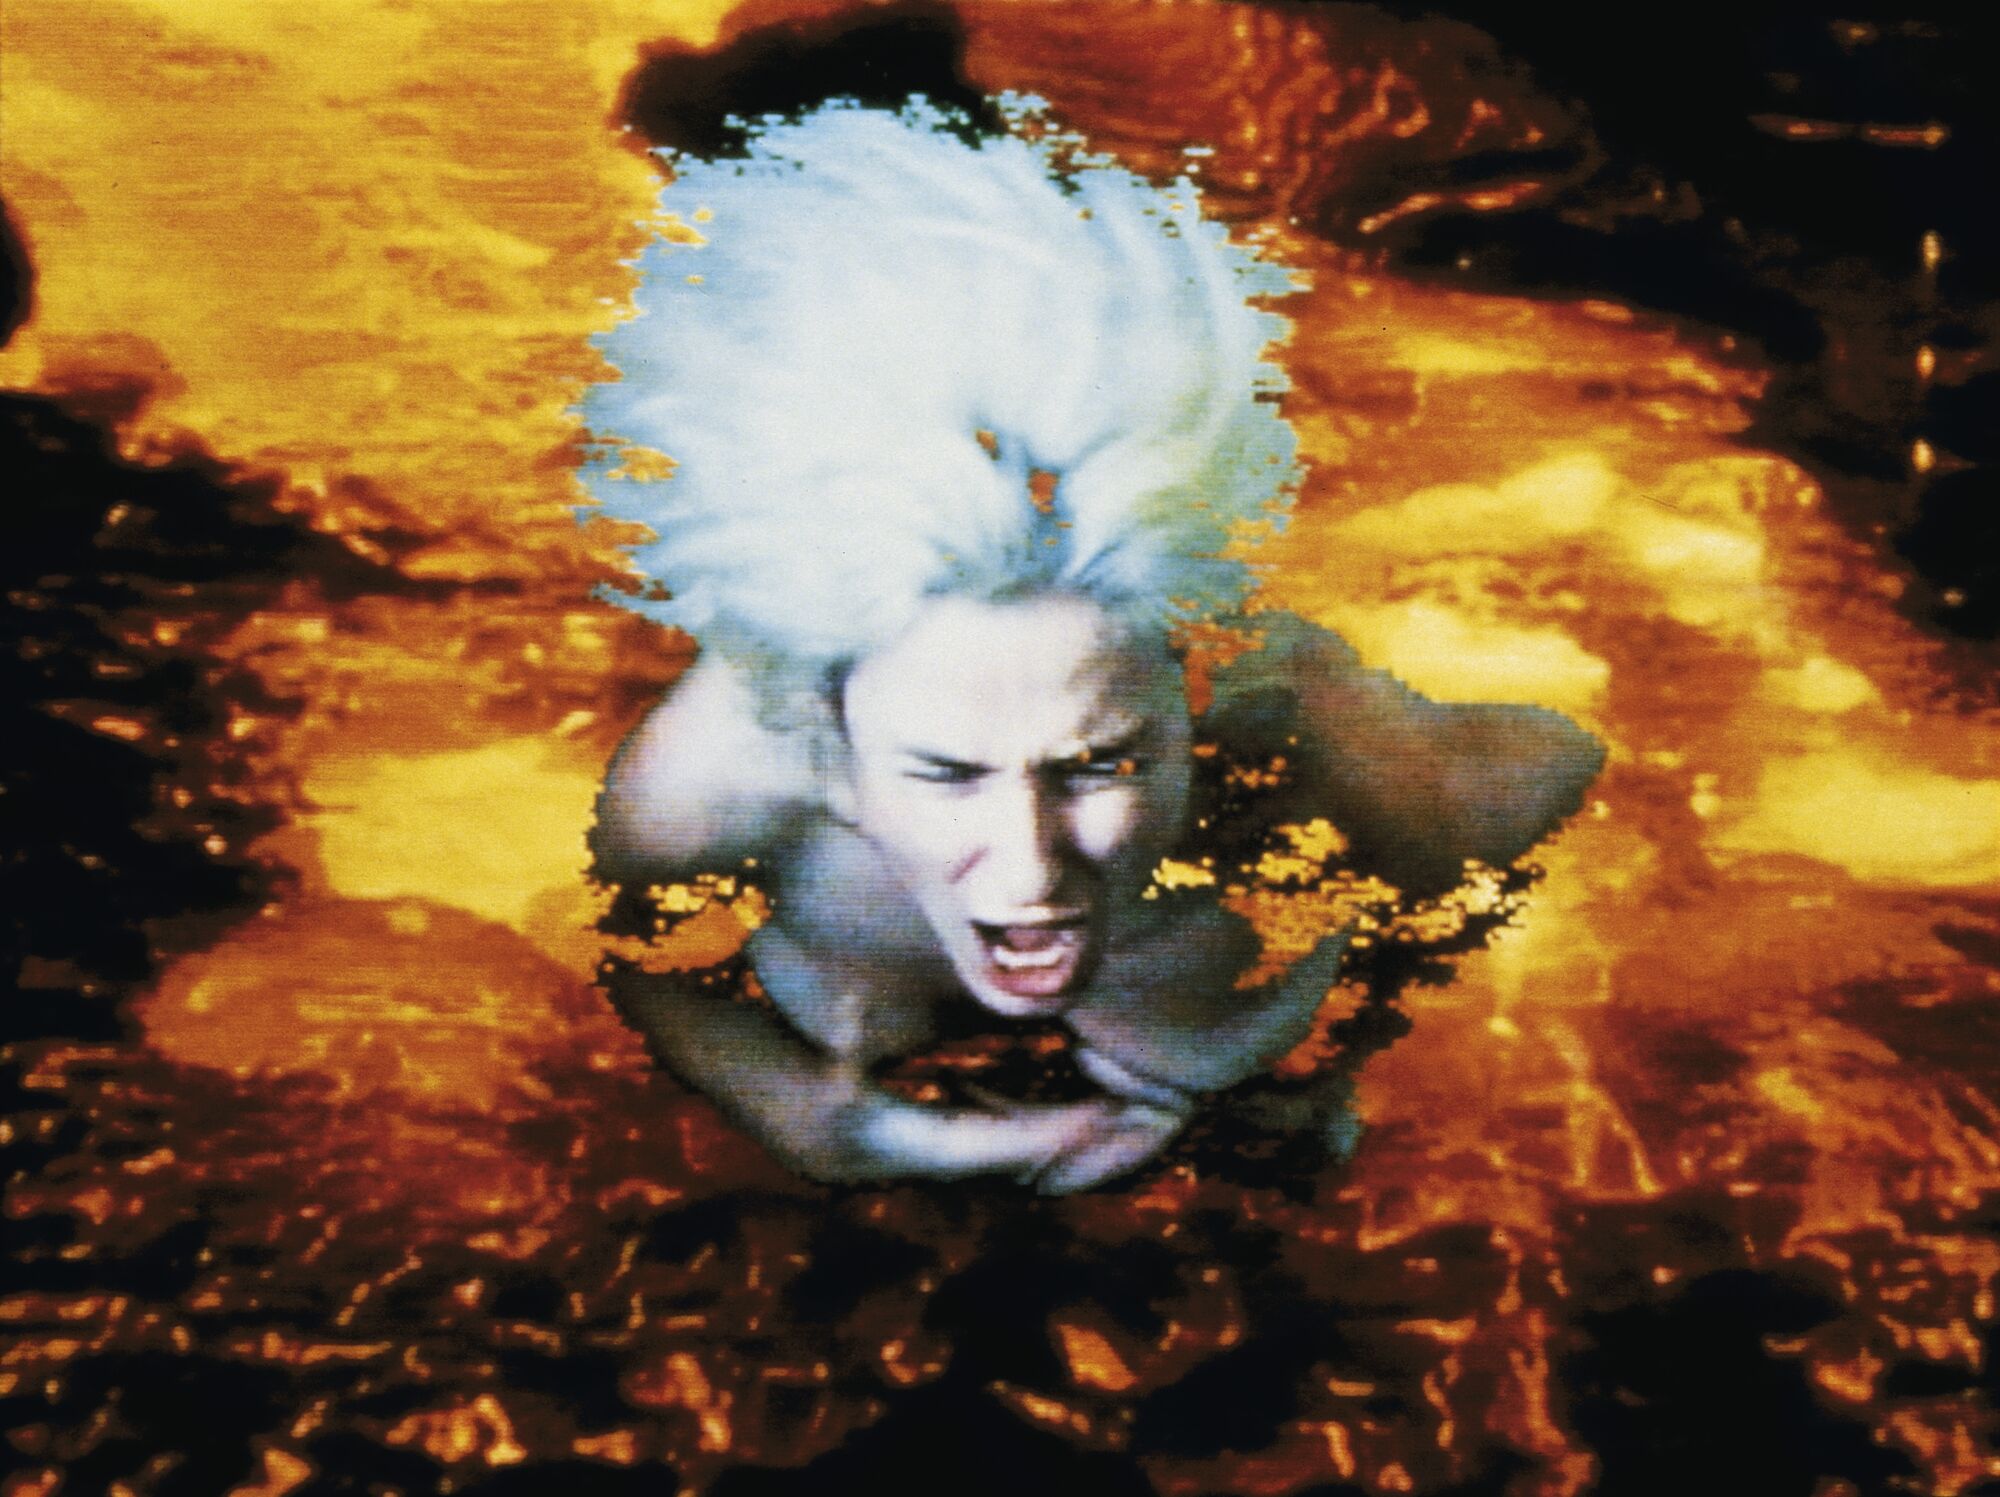 A video still shows a photo of a blonde woman screaming superimposed on a backdrop of lava